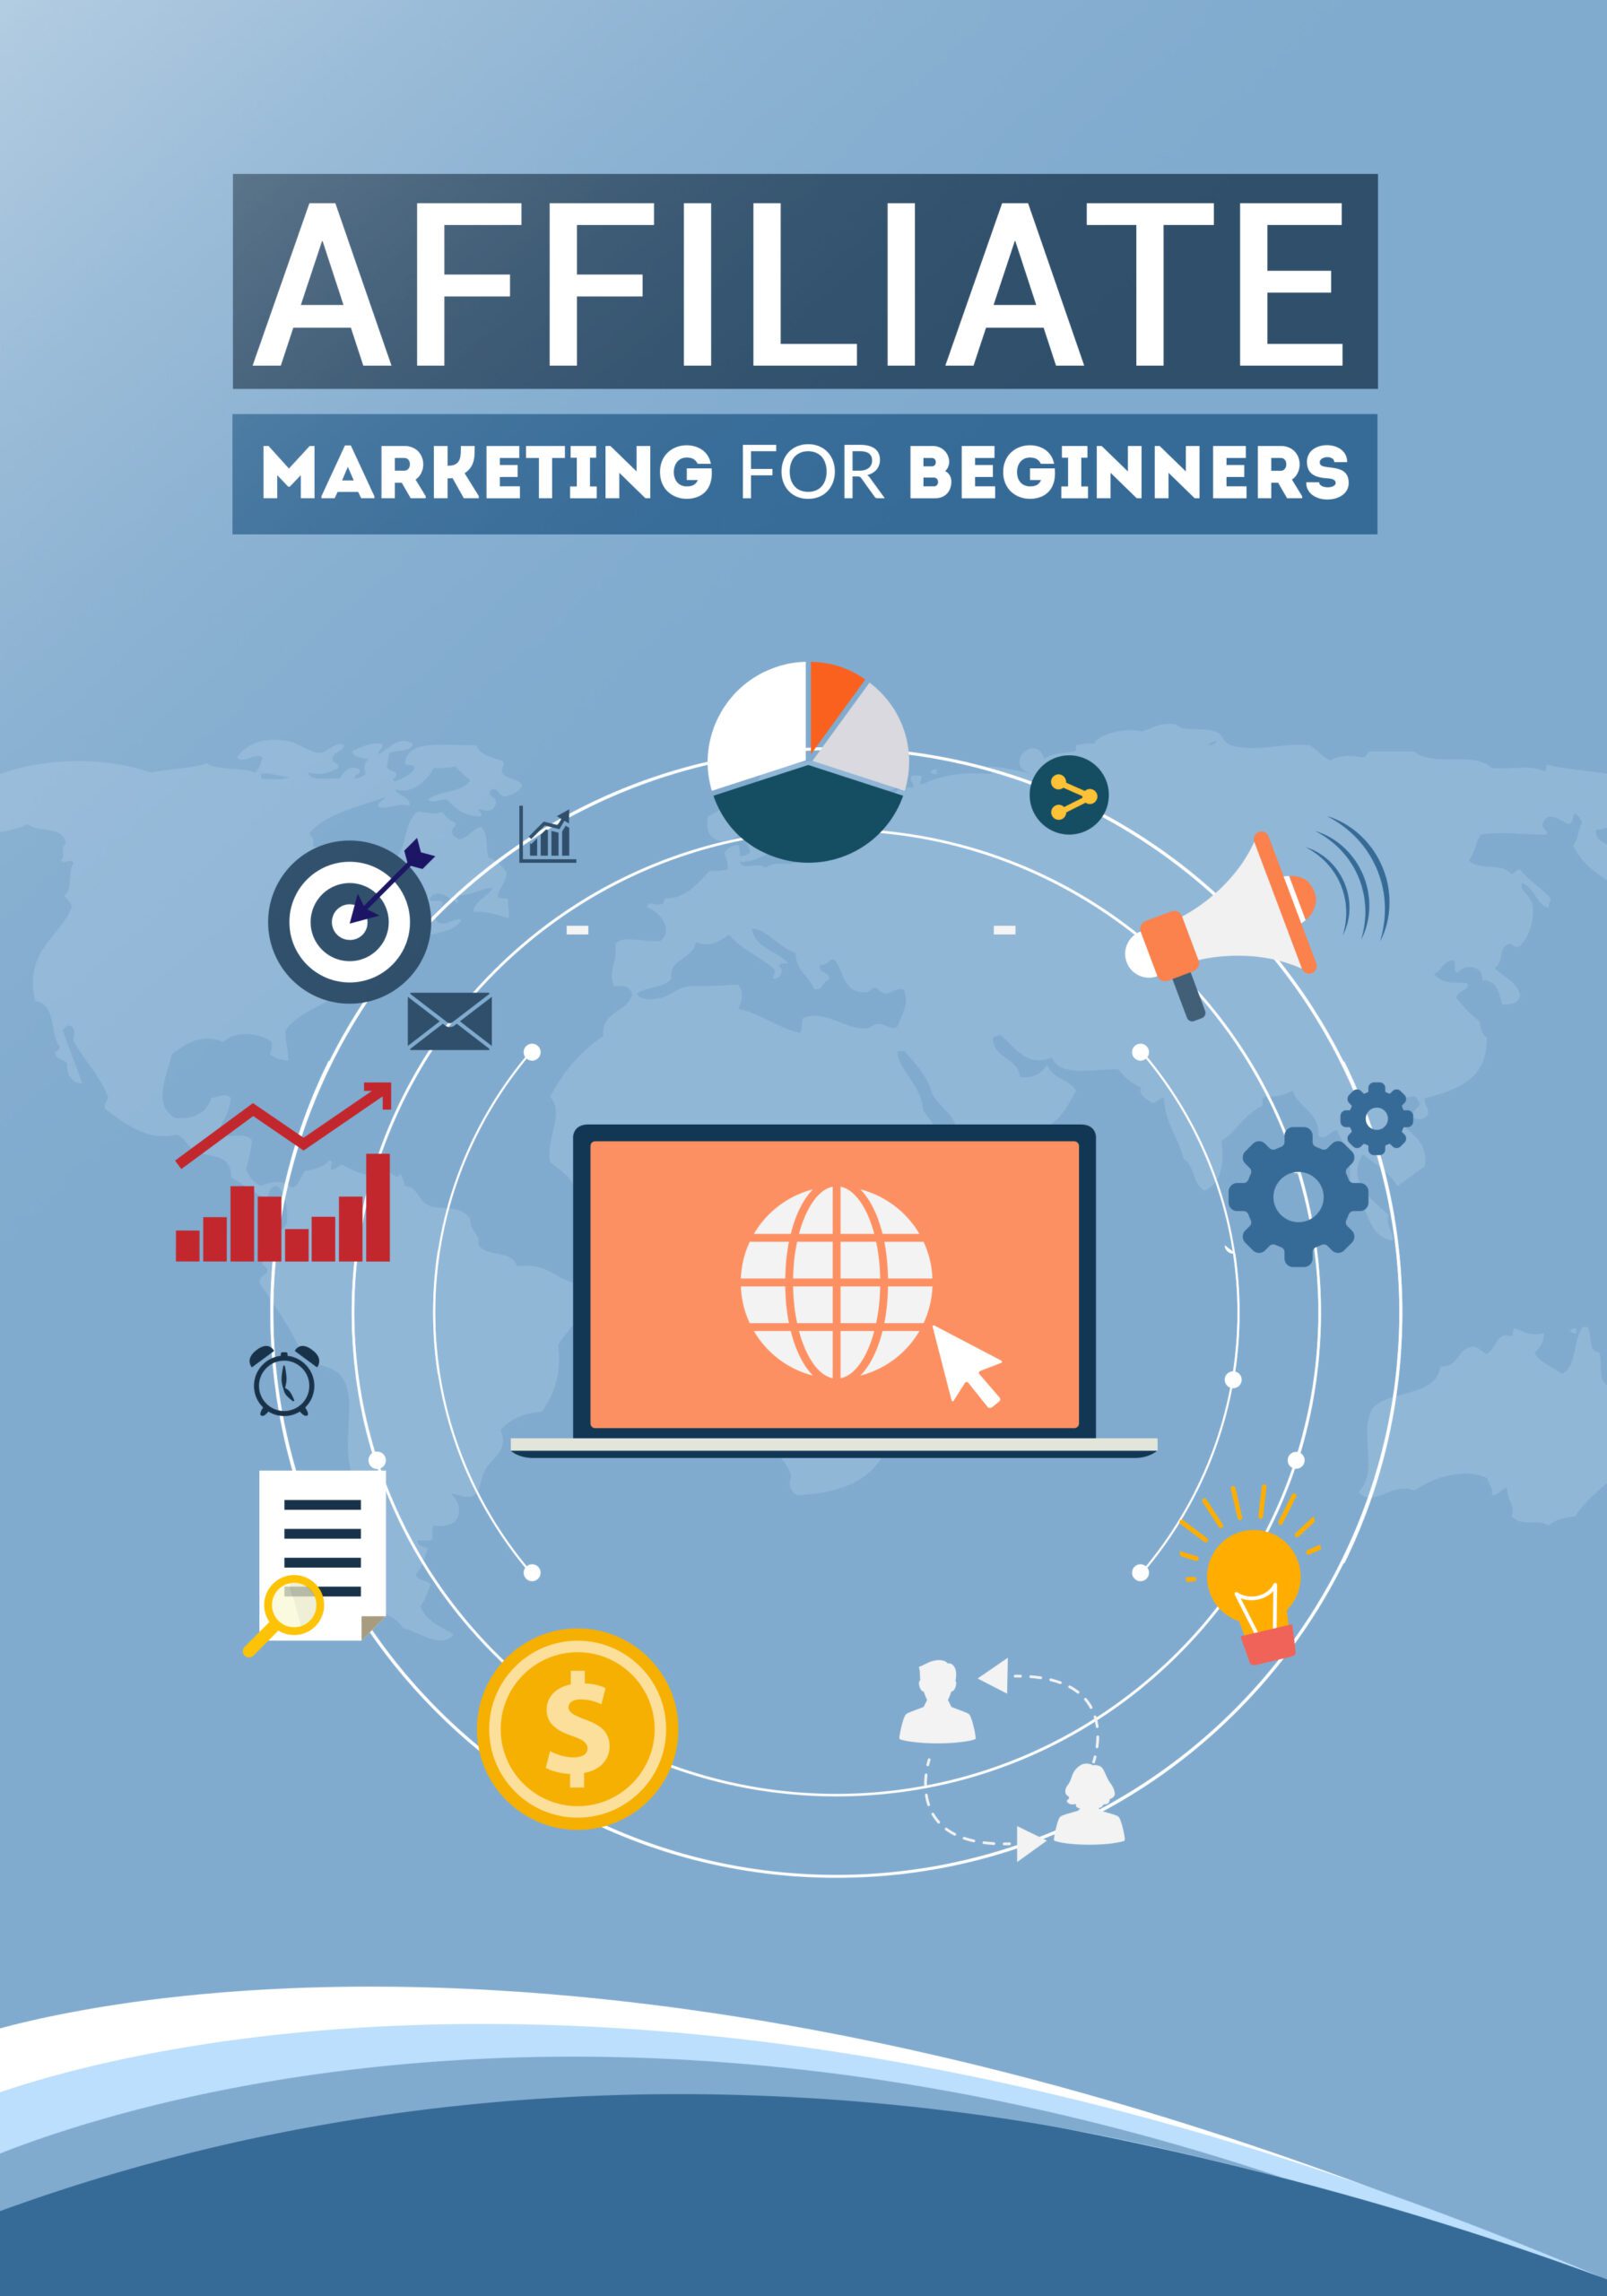 eBook on Affiliate Marketing for Beginners